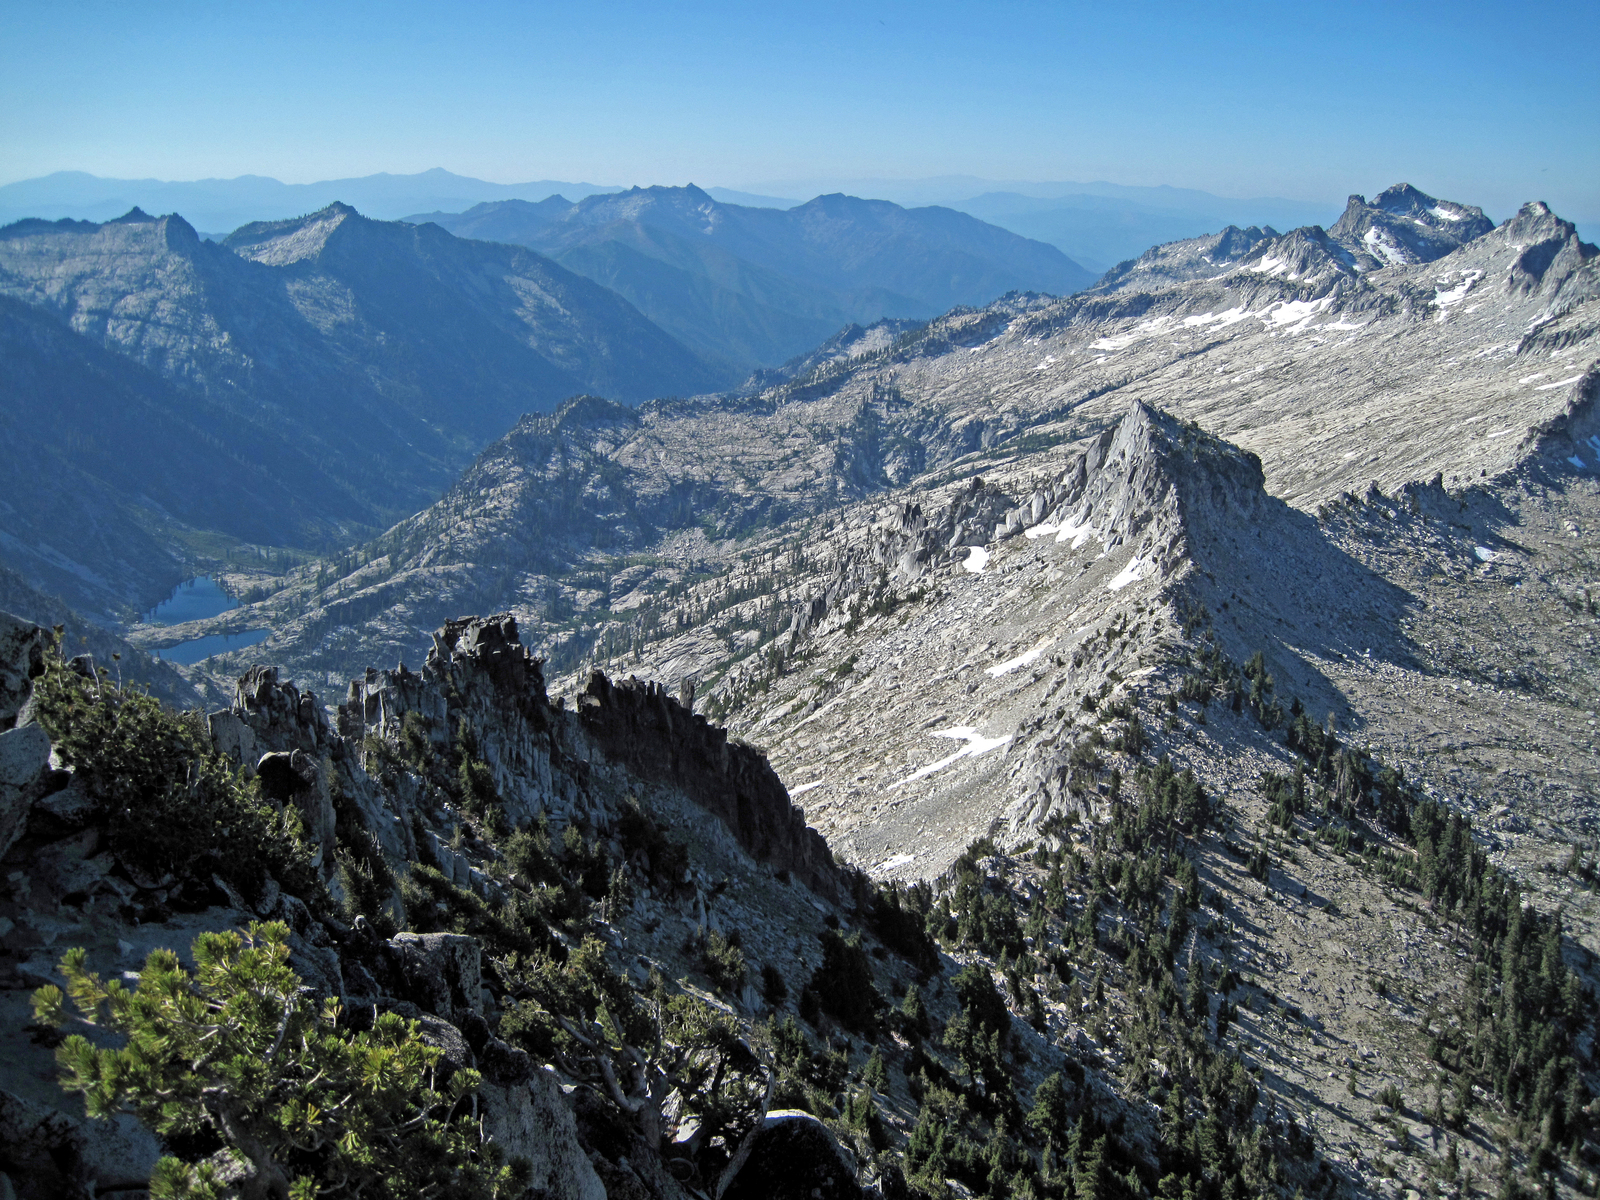 as seen from Mt. Thompson, Trinity Alps, Northern California